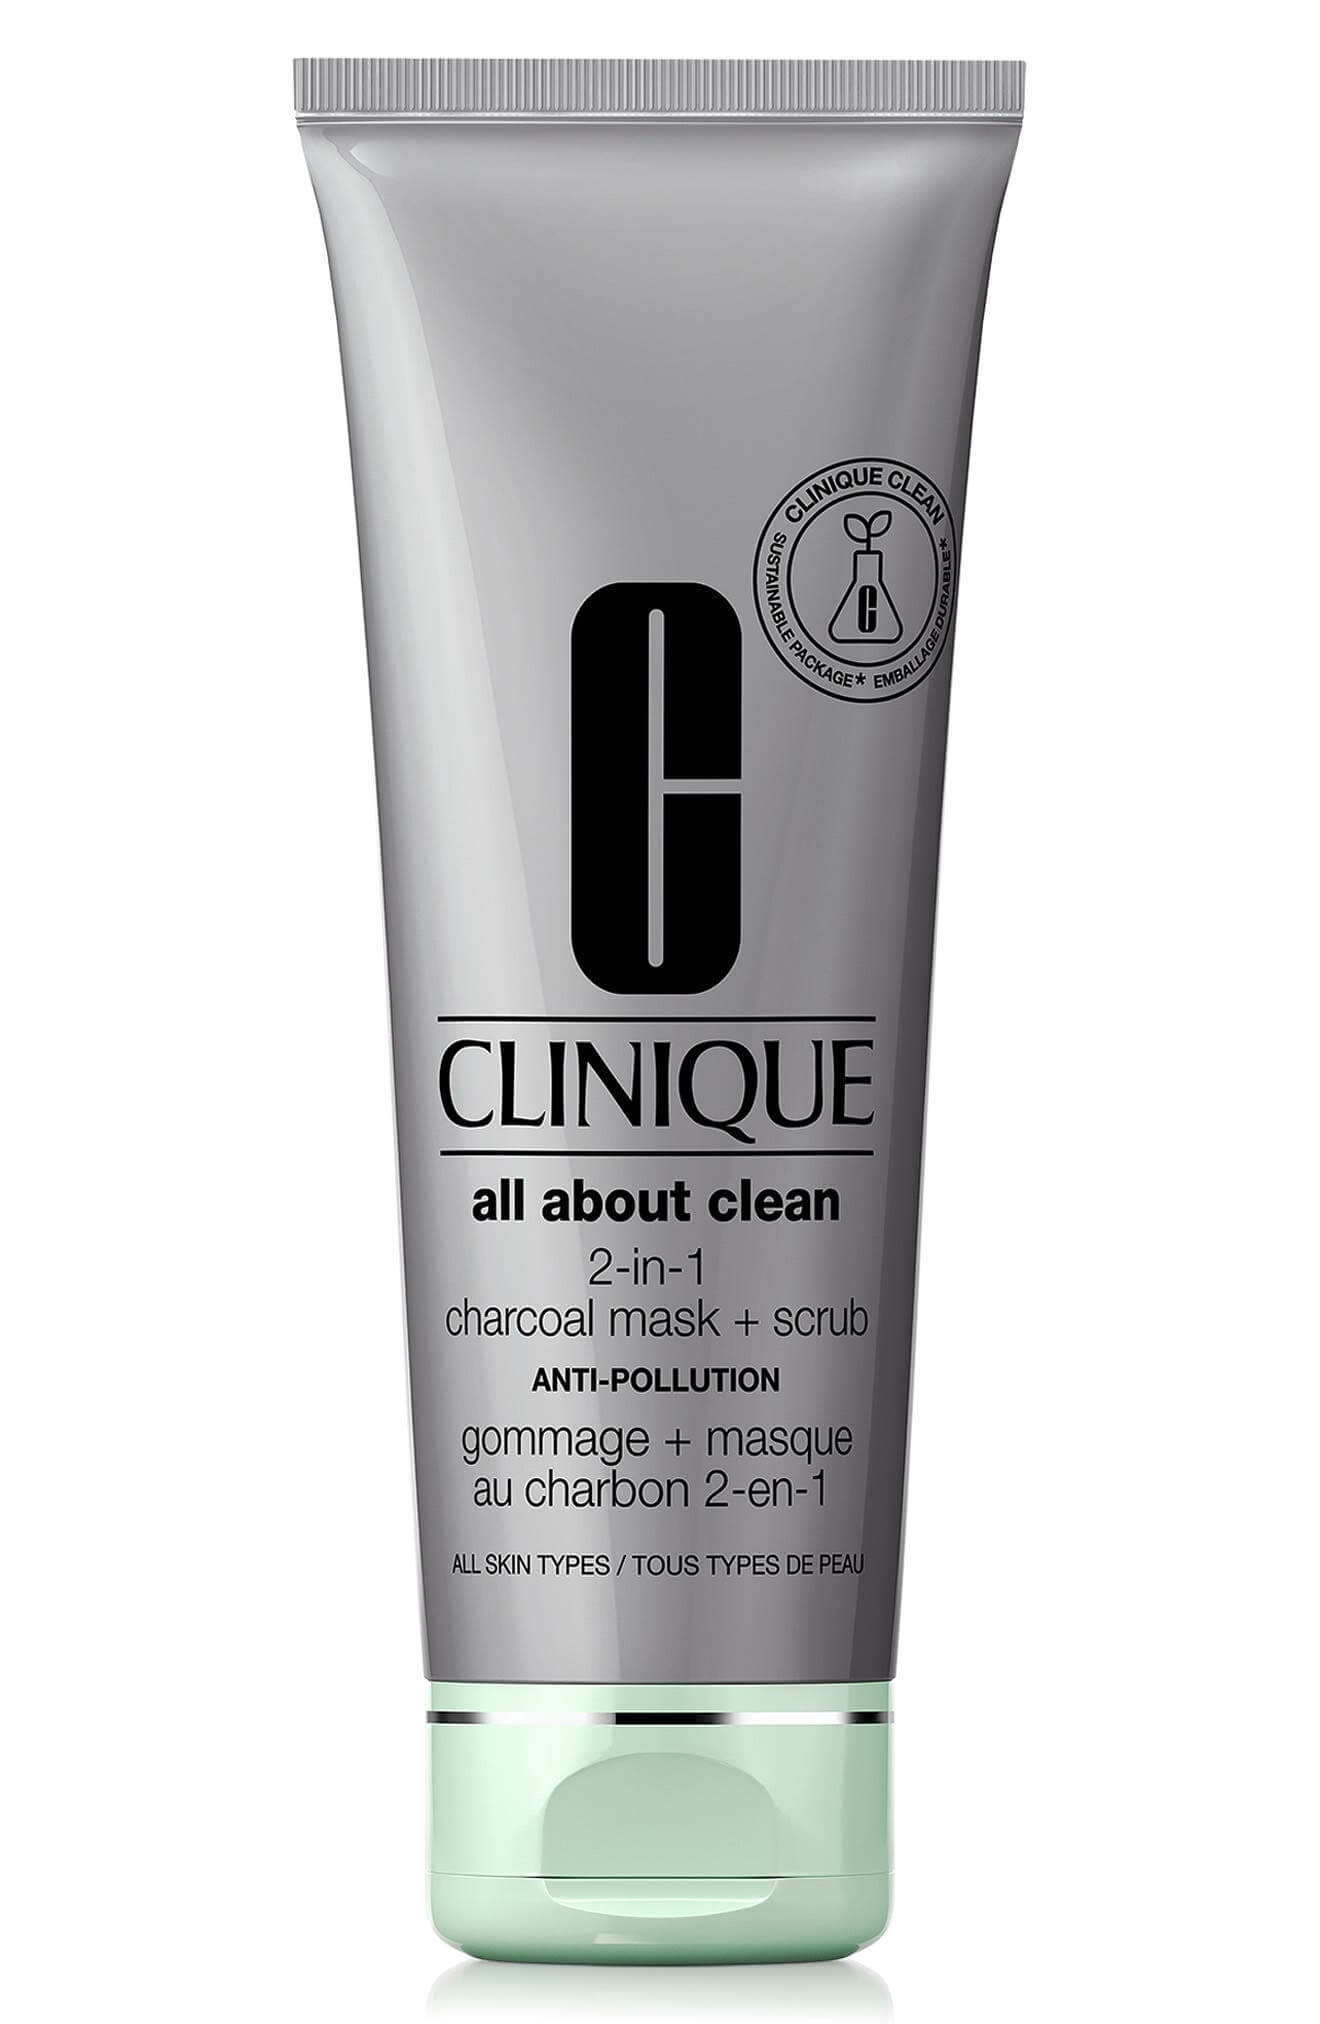 Clinique Detoxikační maska a peeling All About Clean (2-in-1 Charcoal Mask + Scrub) 100 ml